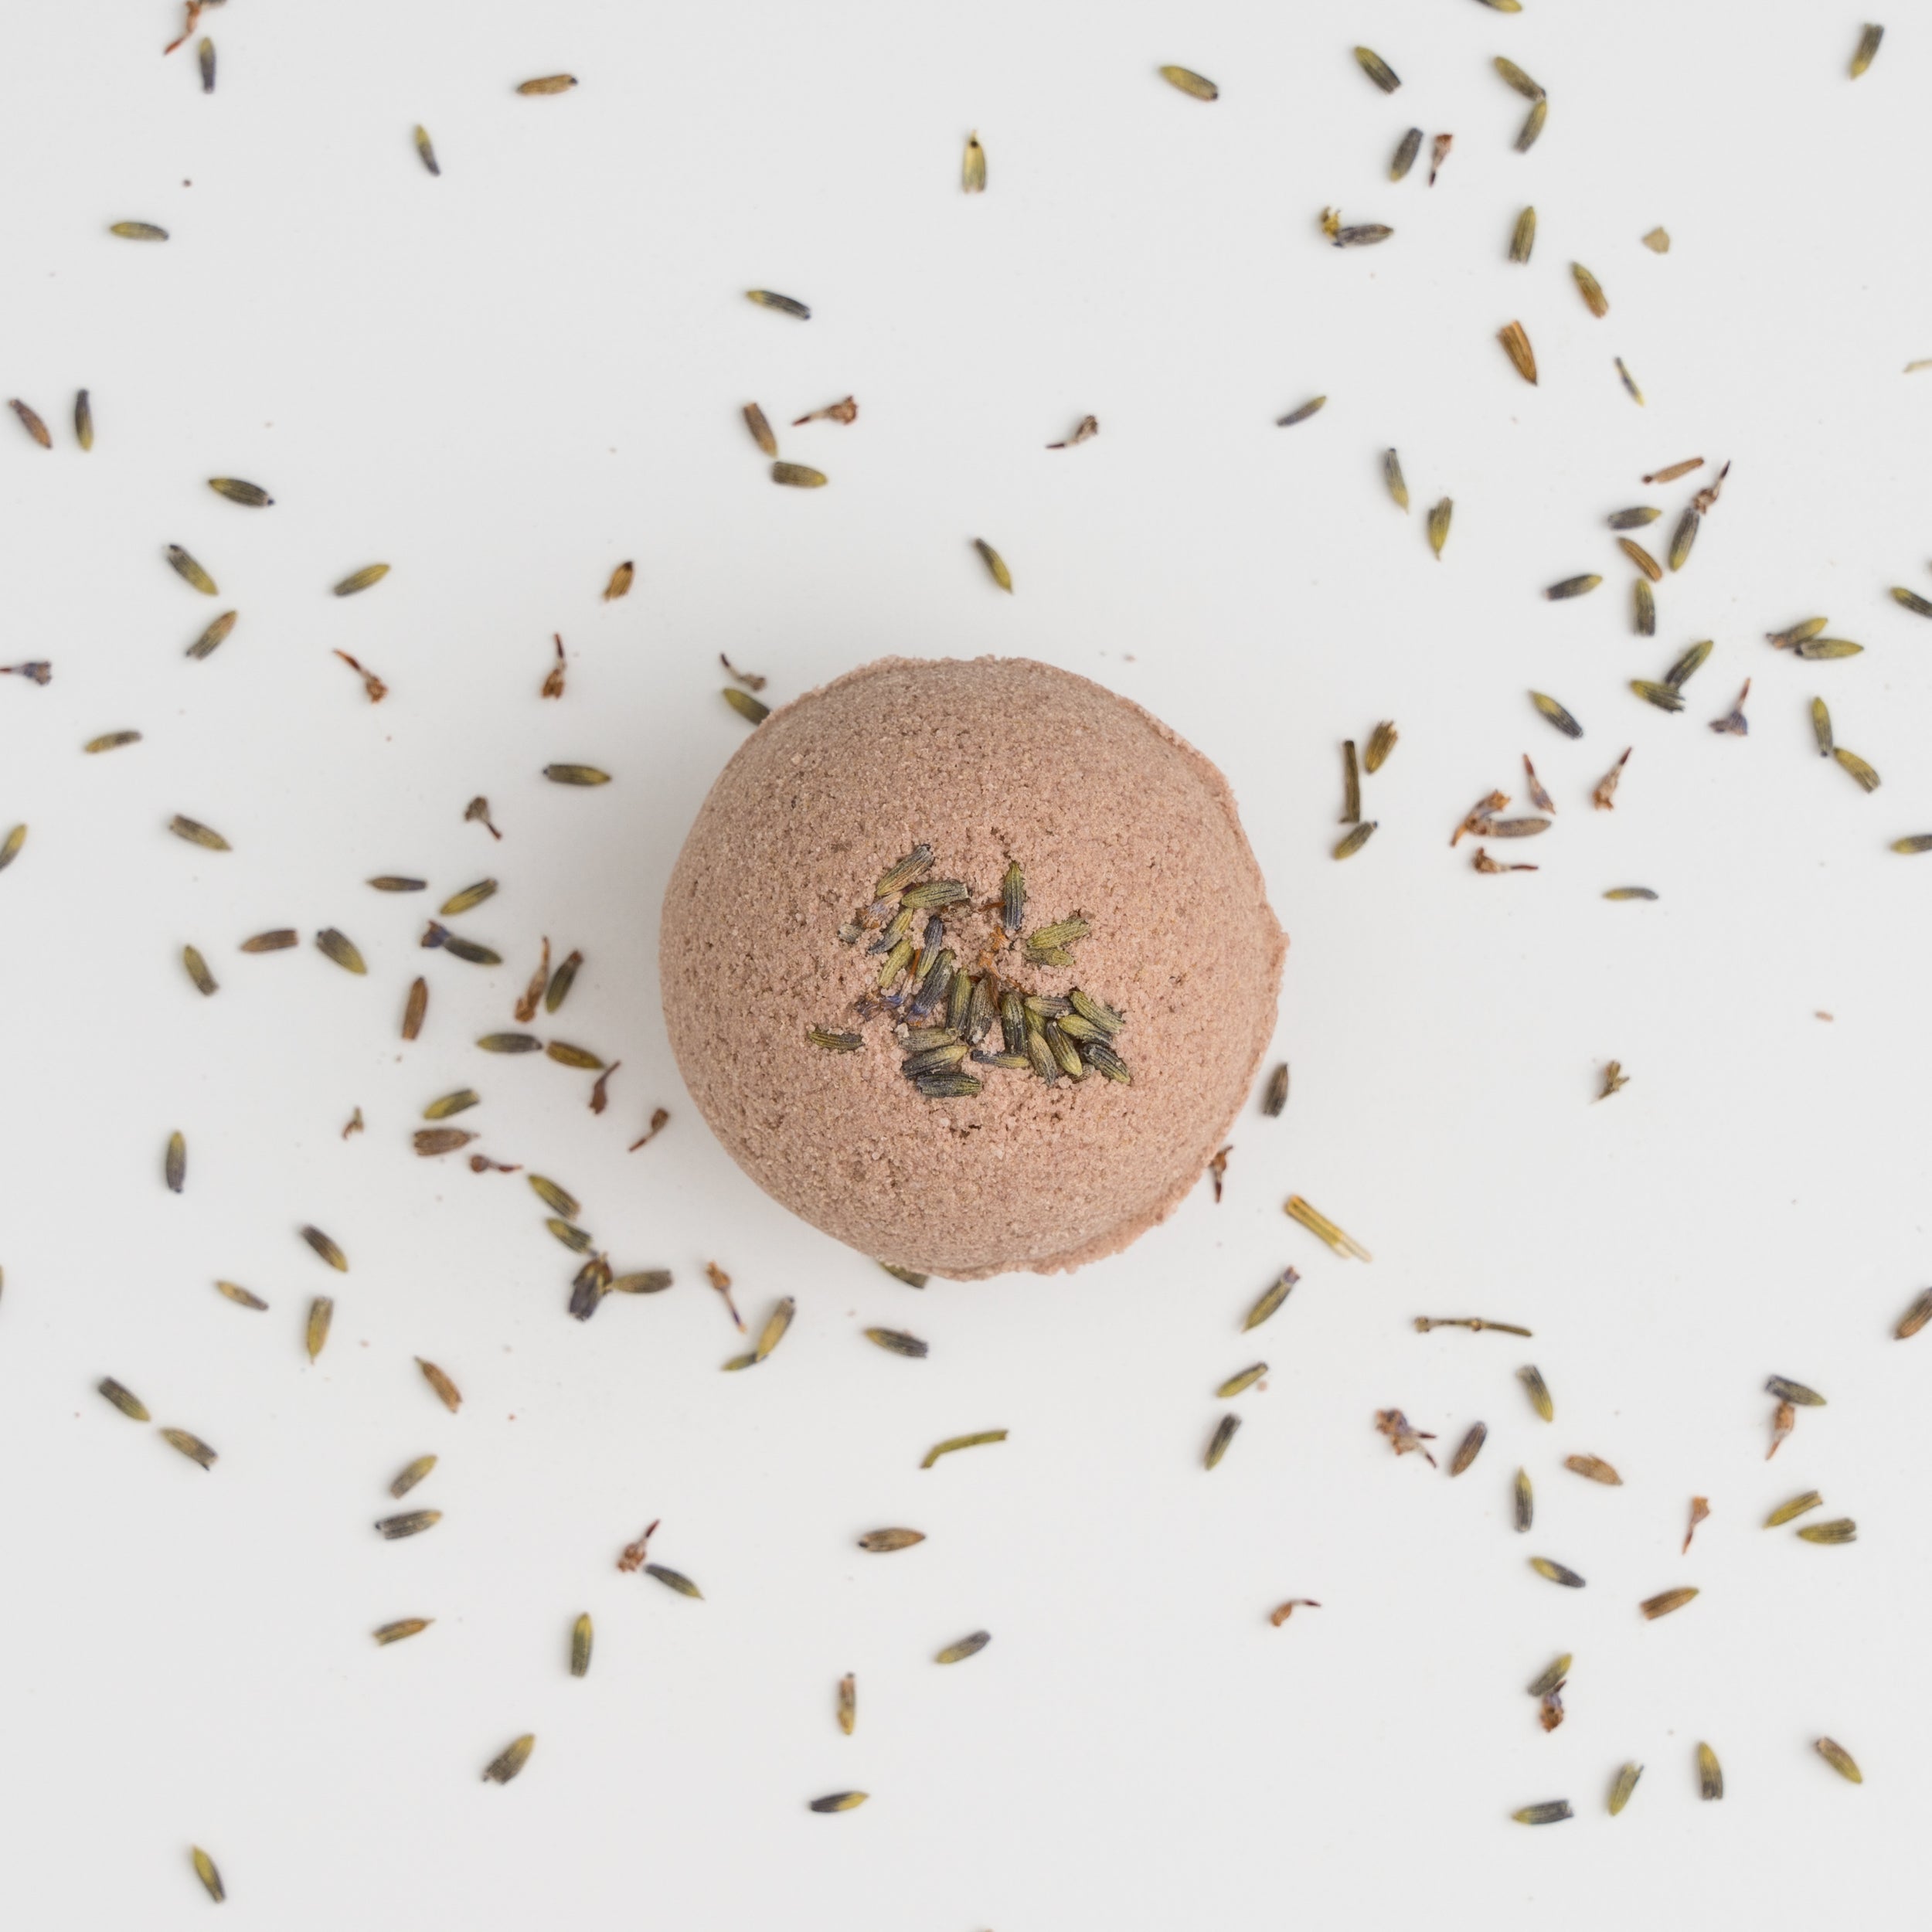 Light purple bath bomb with dried lavender sprinkled around it on a white background